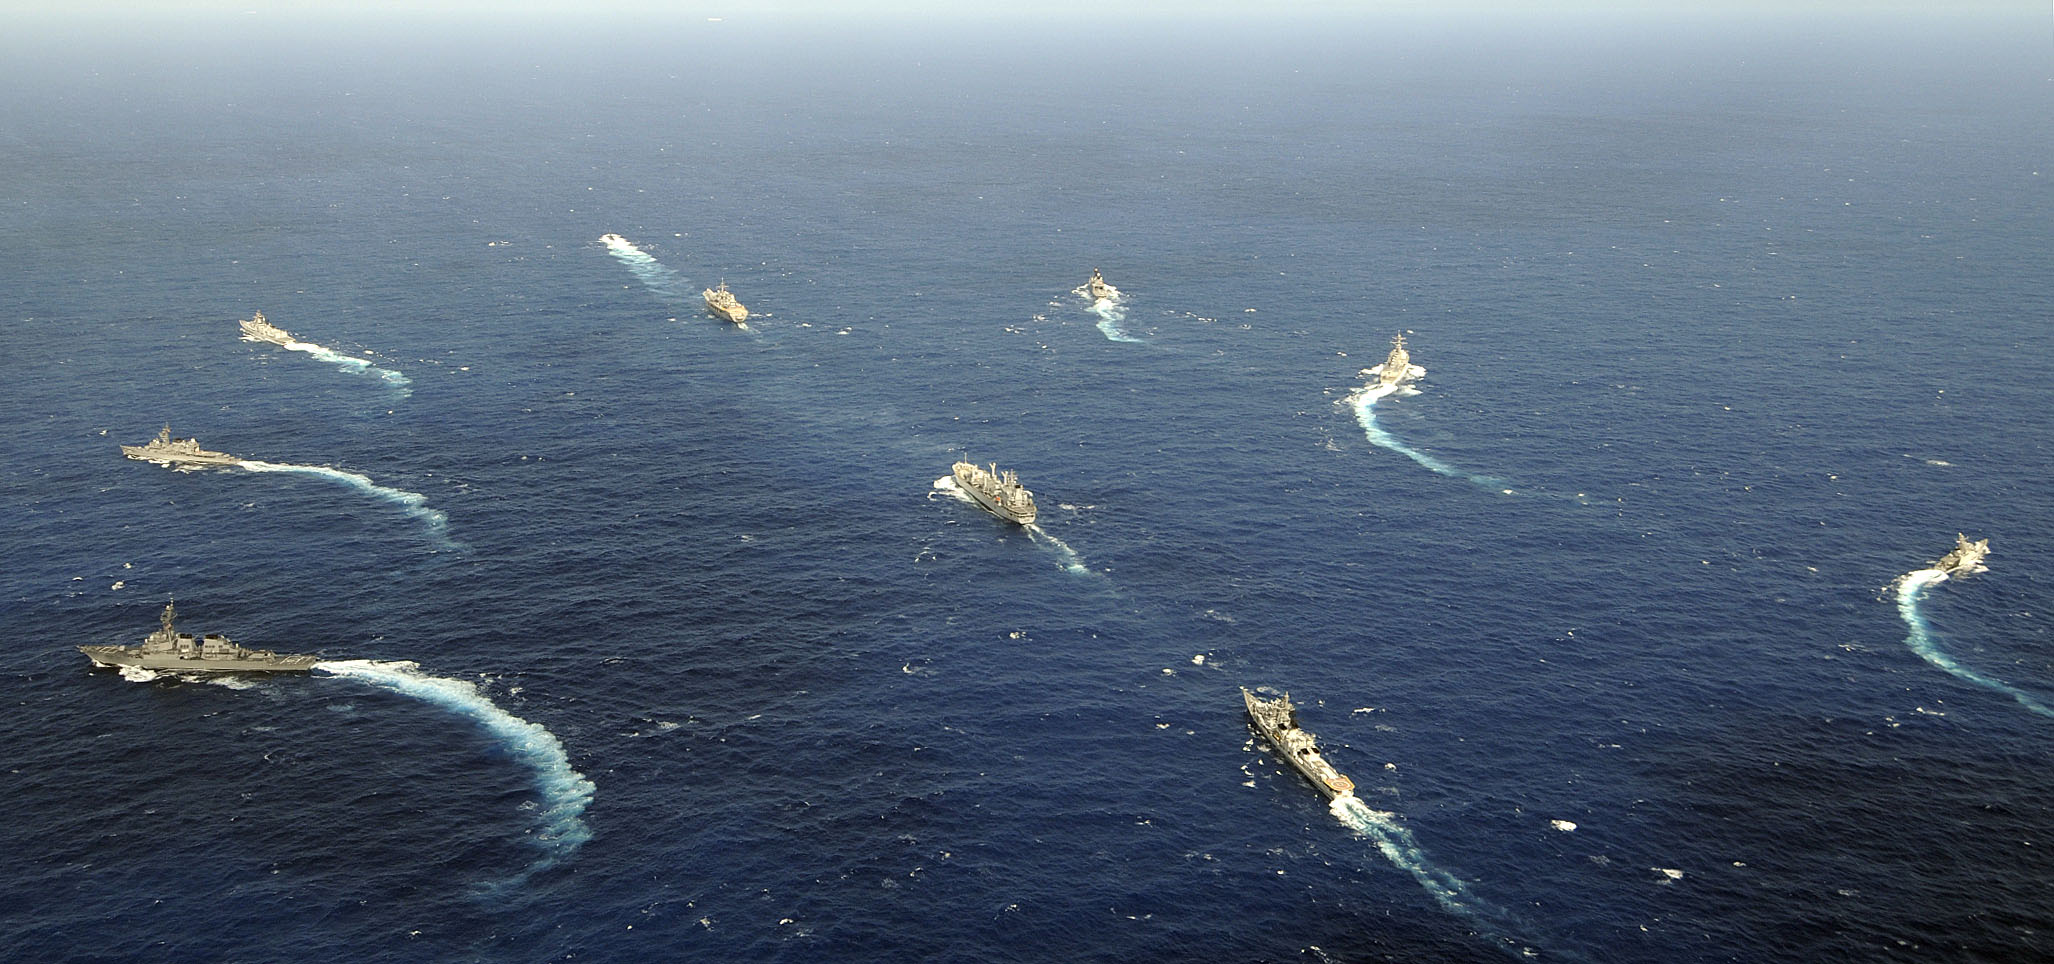 US_Navy_090502-N-3830J-283_Maritime_forces_from_India,_Japan_and_the_U.S._are_underway_during_Malabar_2009,_a_trilateral_training_exercise_led_by_the_Indian_Navy.jpg